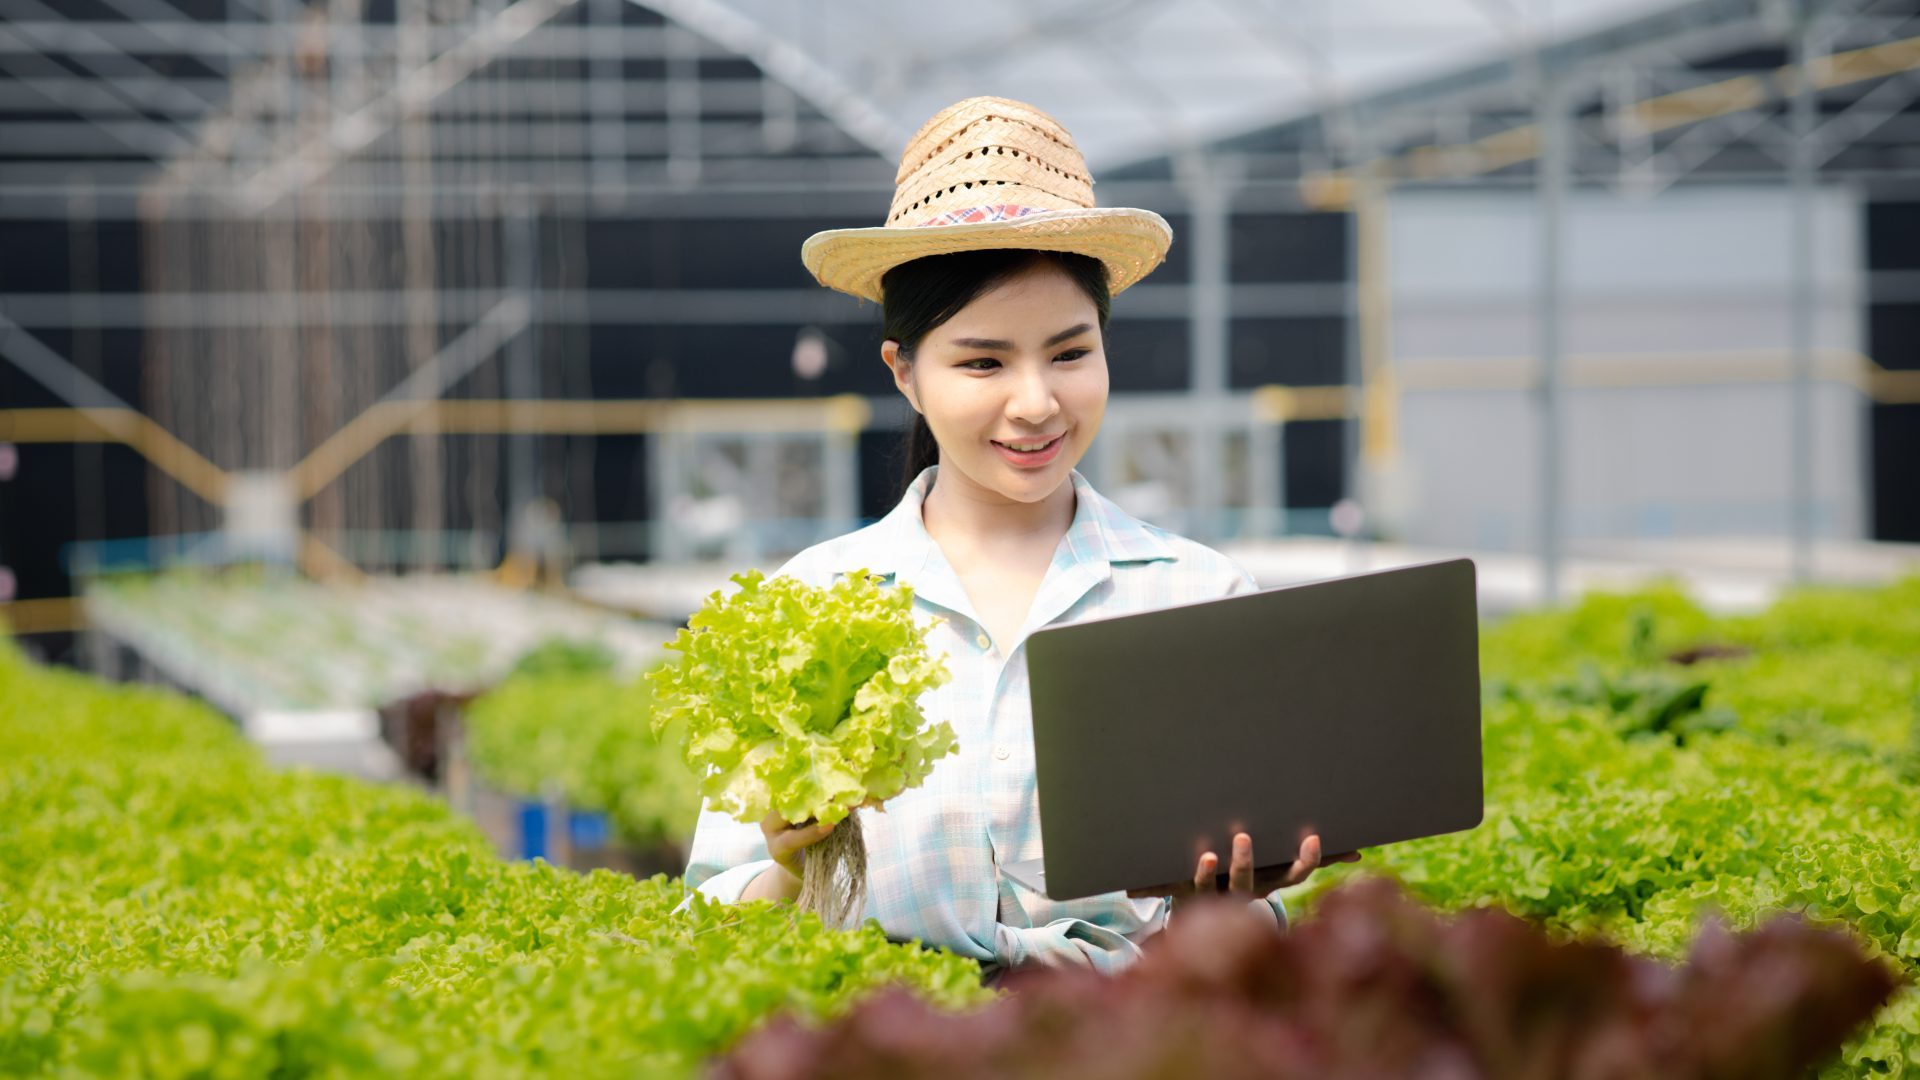 A gardener woman holding laptop in the hydroponics field grows wholesale hydroponic vegetables in re